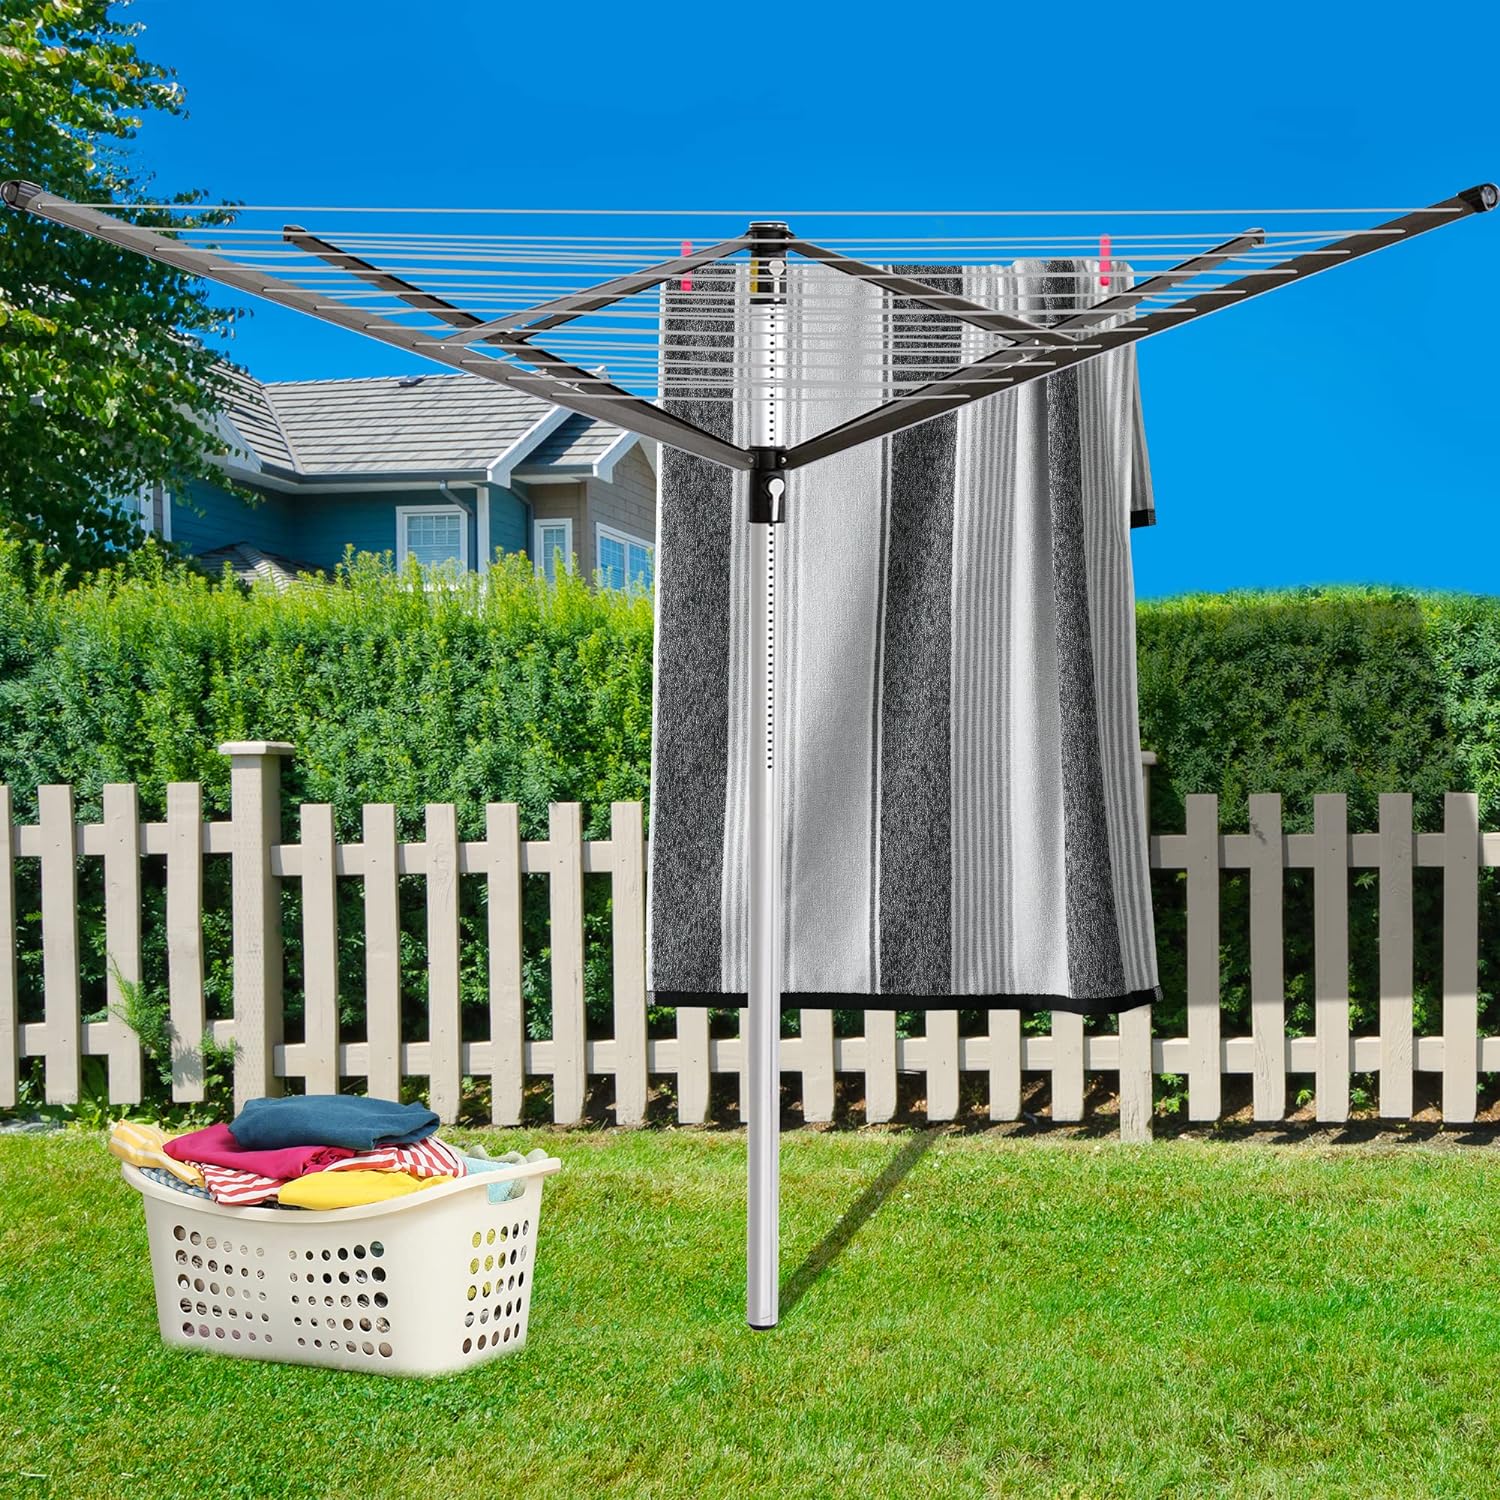 Bizvalue Clothesline Outdoor Rotary Dryer, 4 Arms Foldable Heavy Duty  Height Adjustable Clothes Drying Rack, 196FT Drying Space, Hang Wet or Dry  Laundry